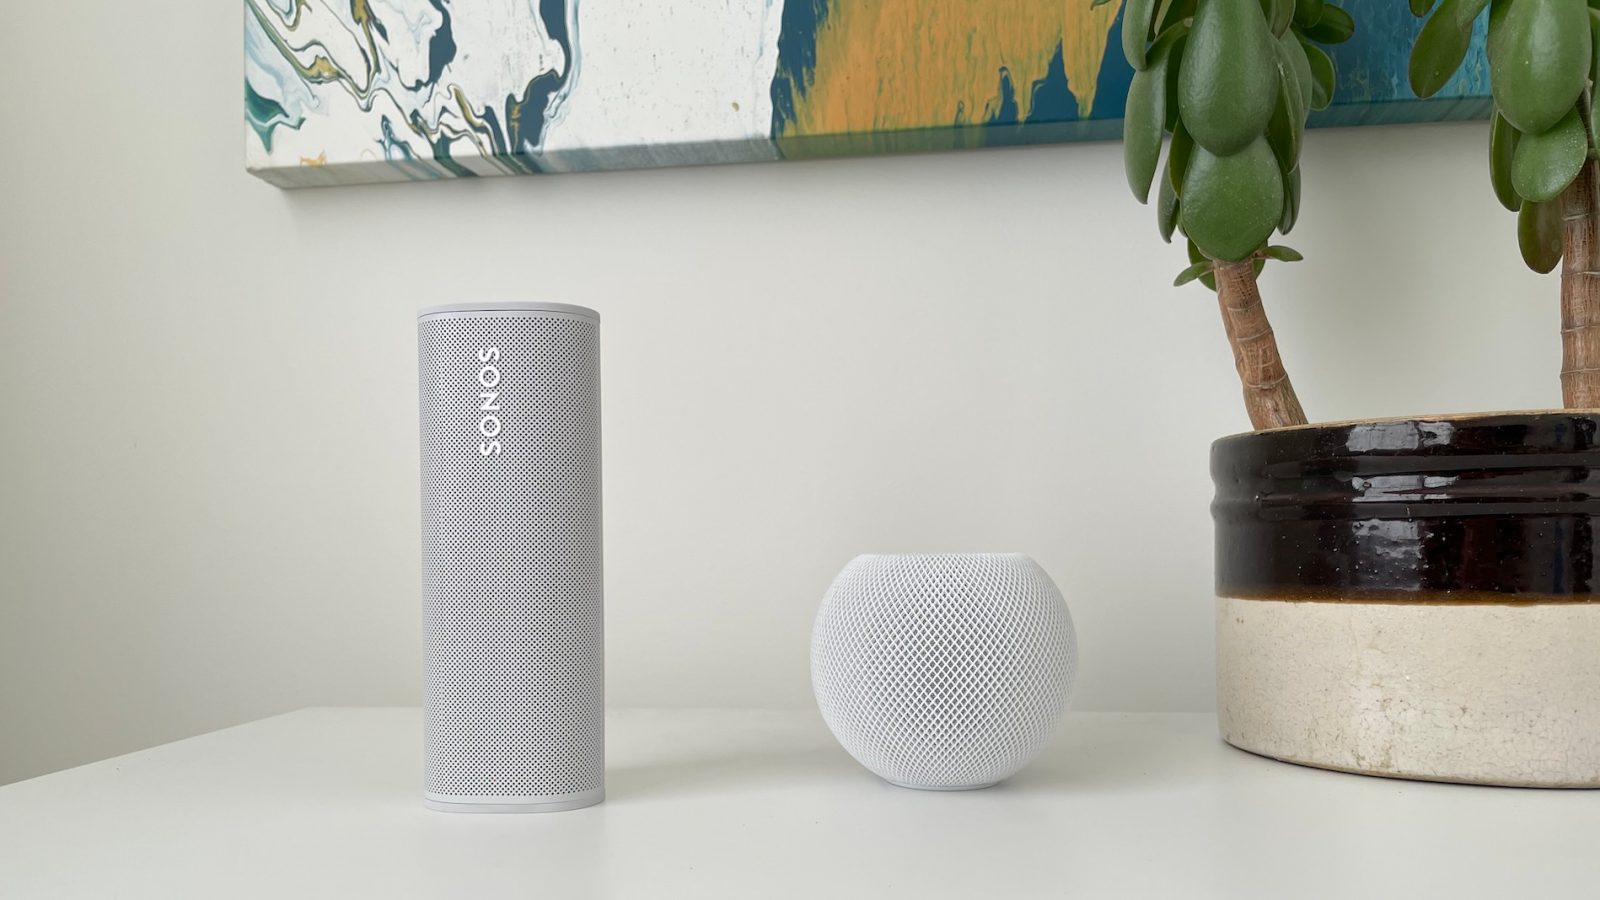 Sonos Roam is a nearly perfect portable Assistant - 9to5Google